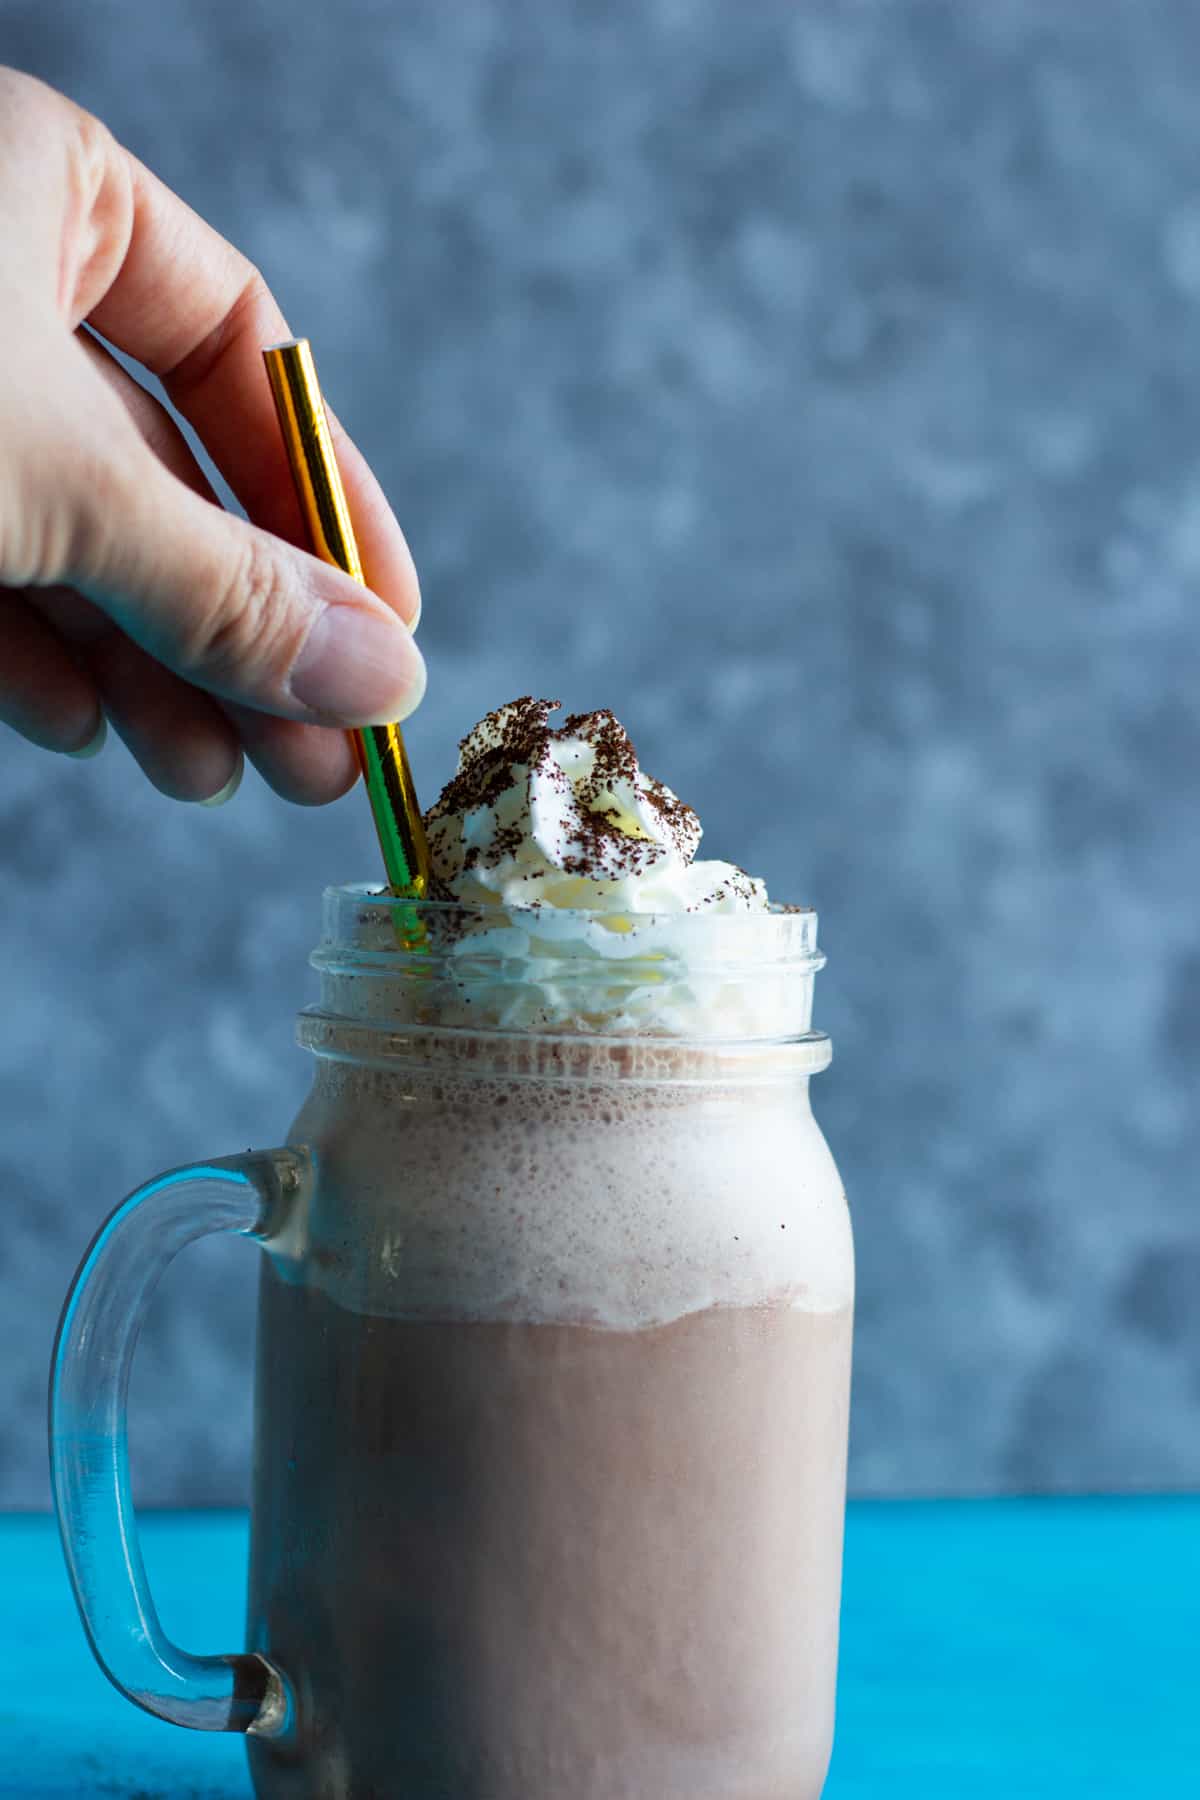 milkshake made with coffee in a glass with a golden straw